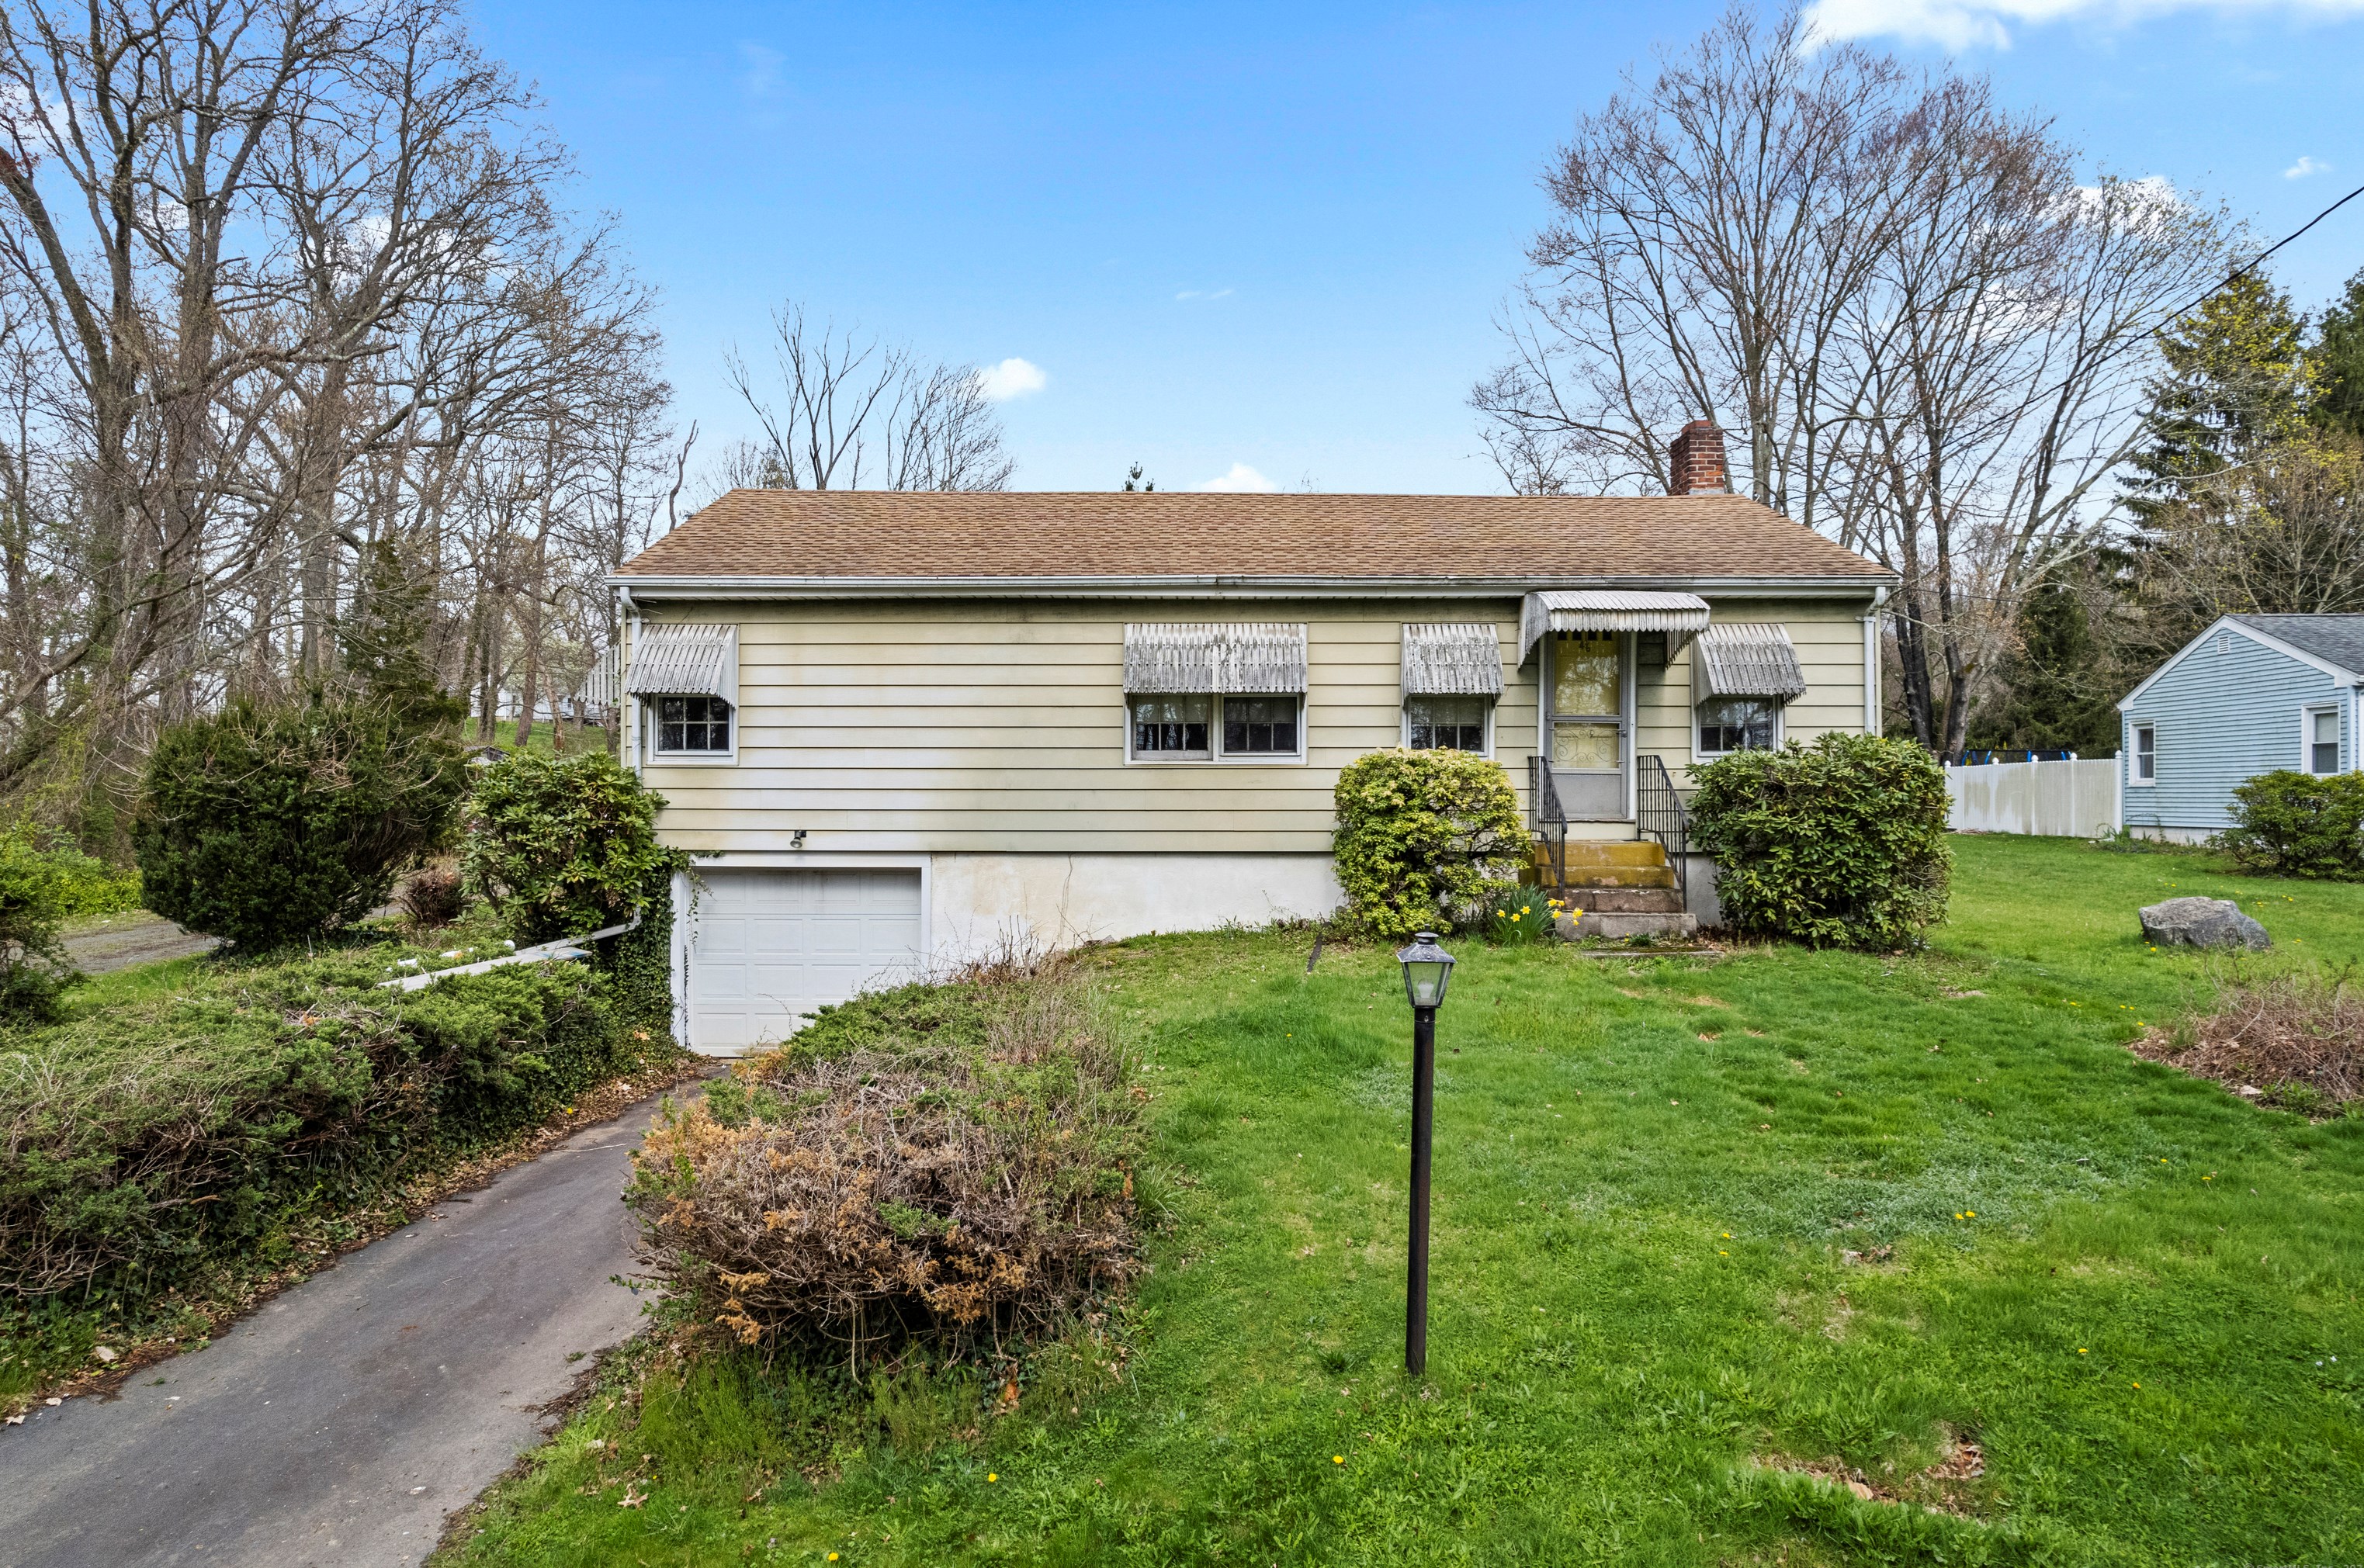 46 Sperry Dr, Guilford, CT 06437